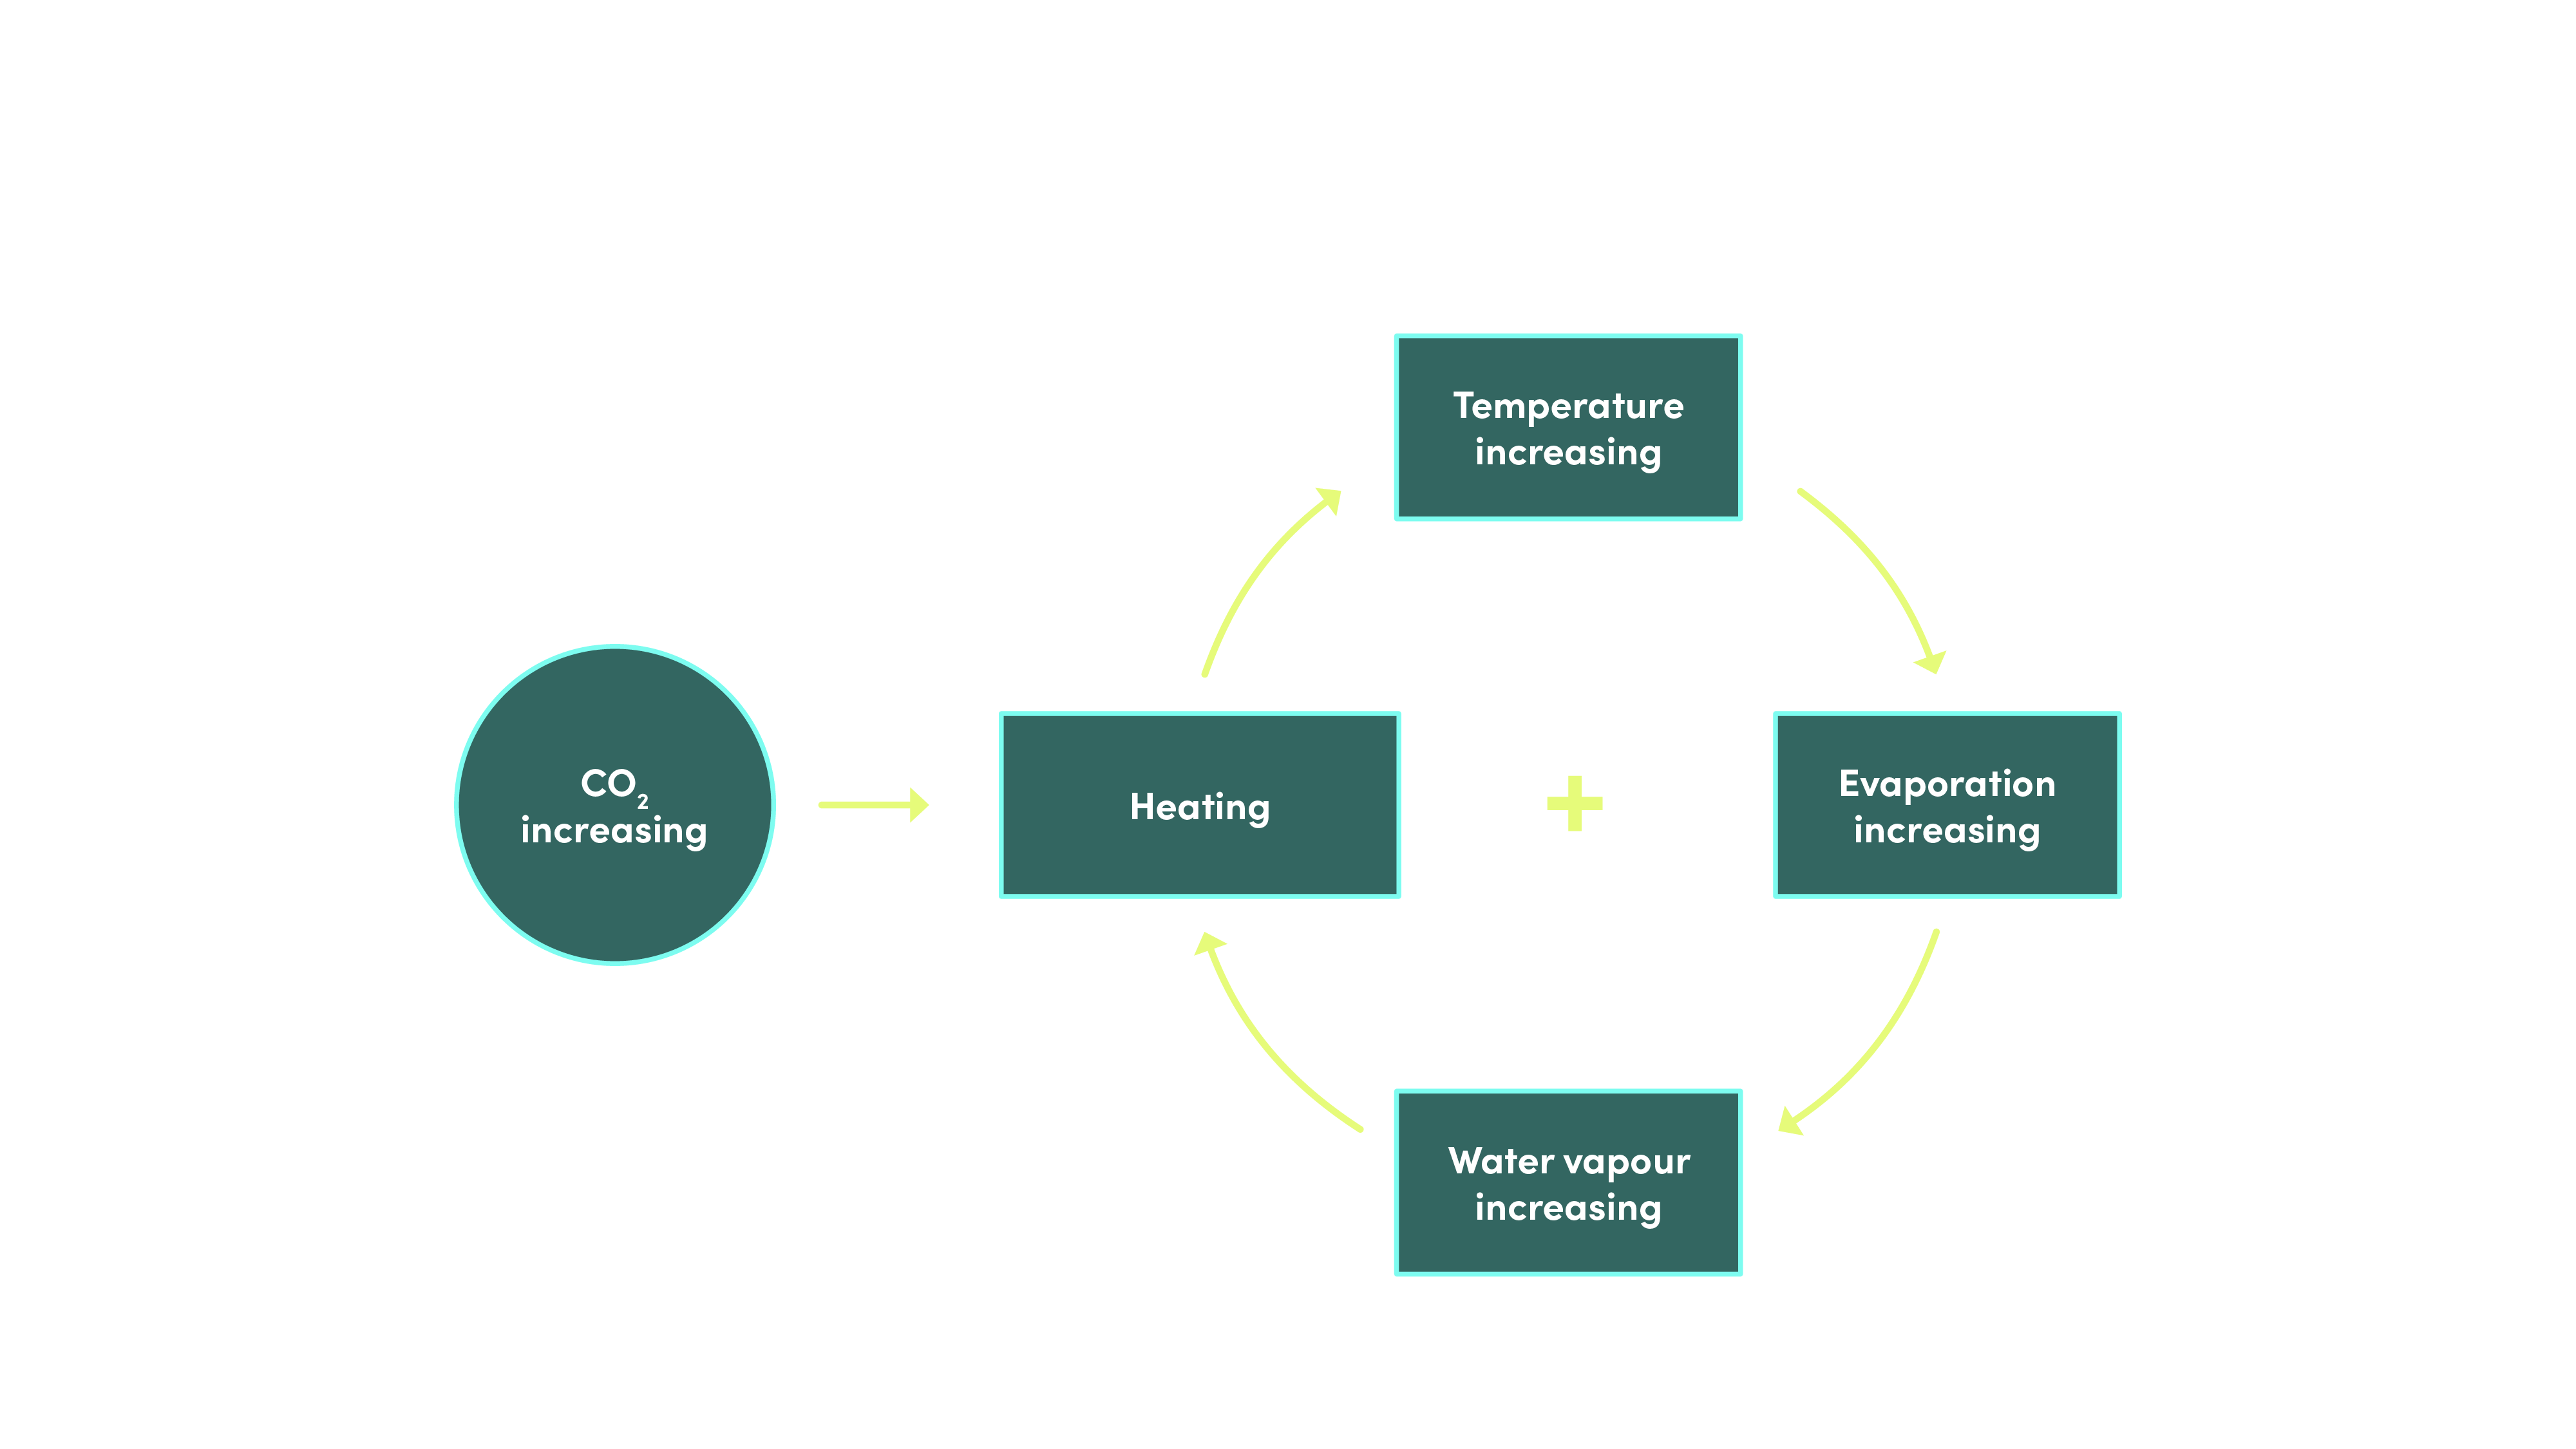 Water vapour feedback